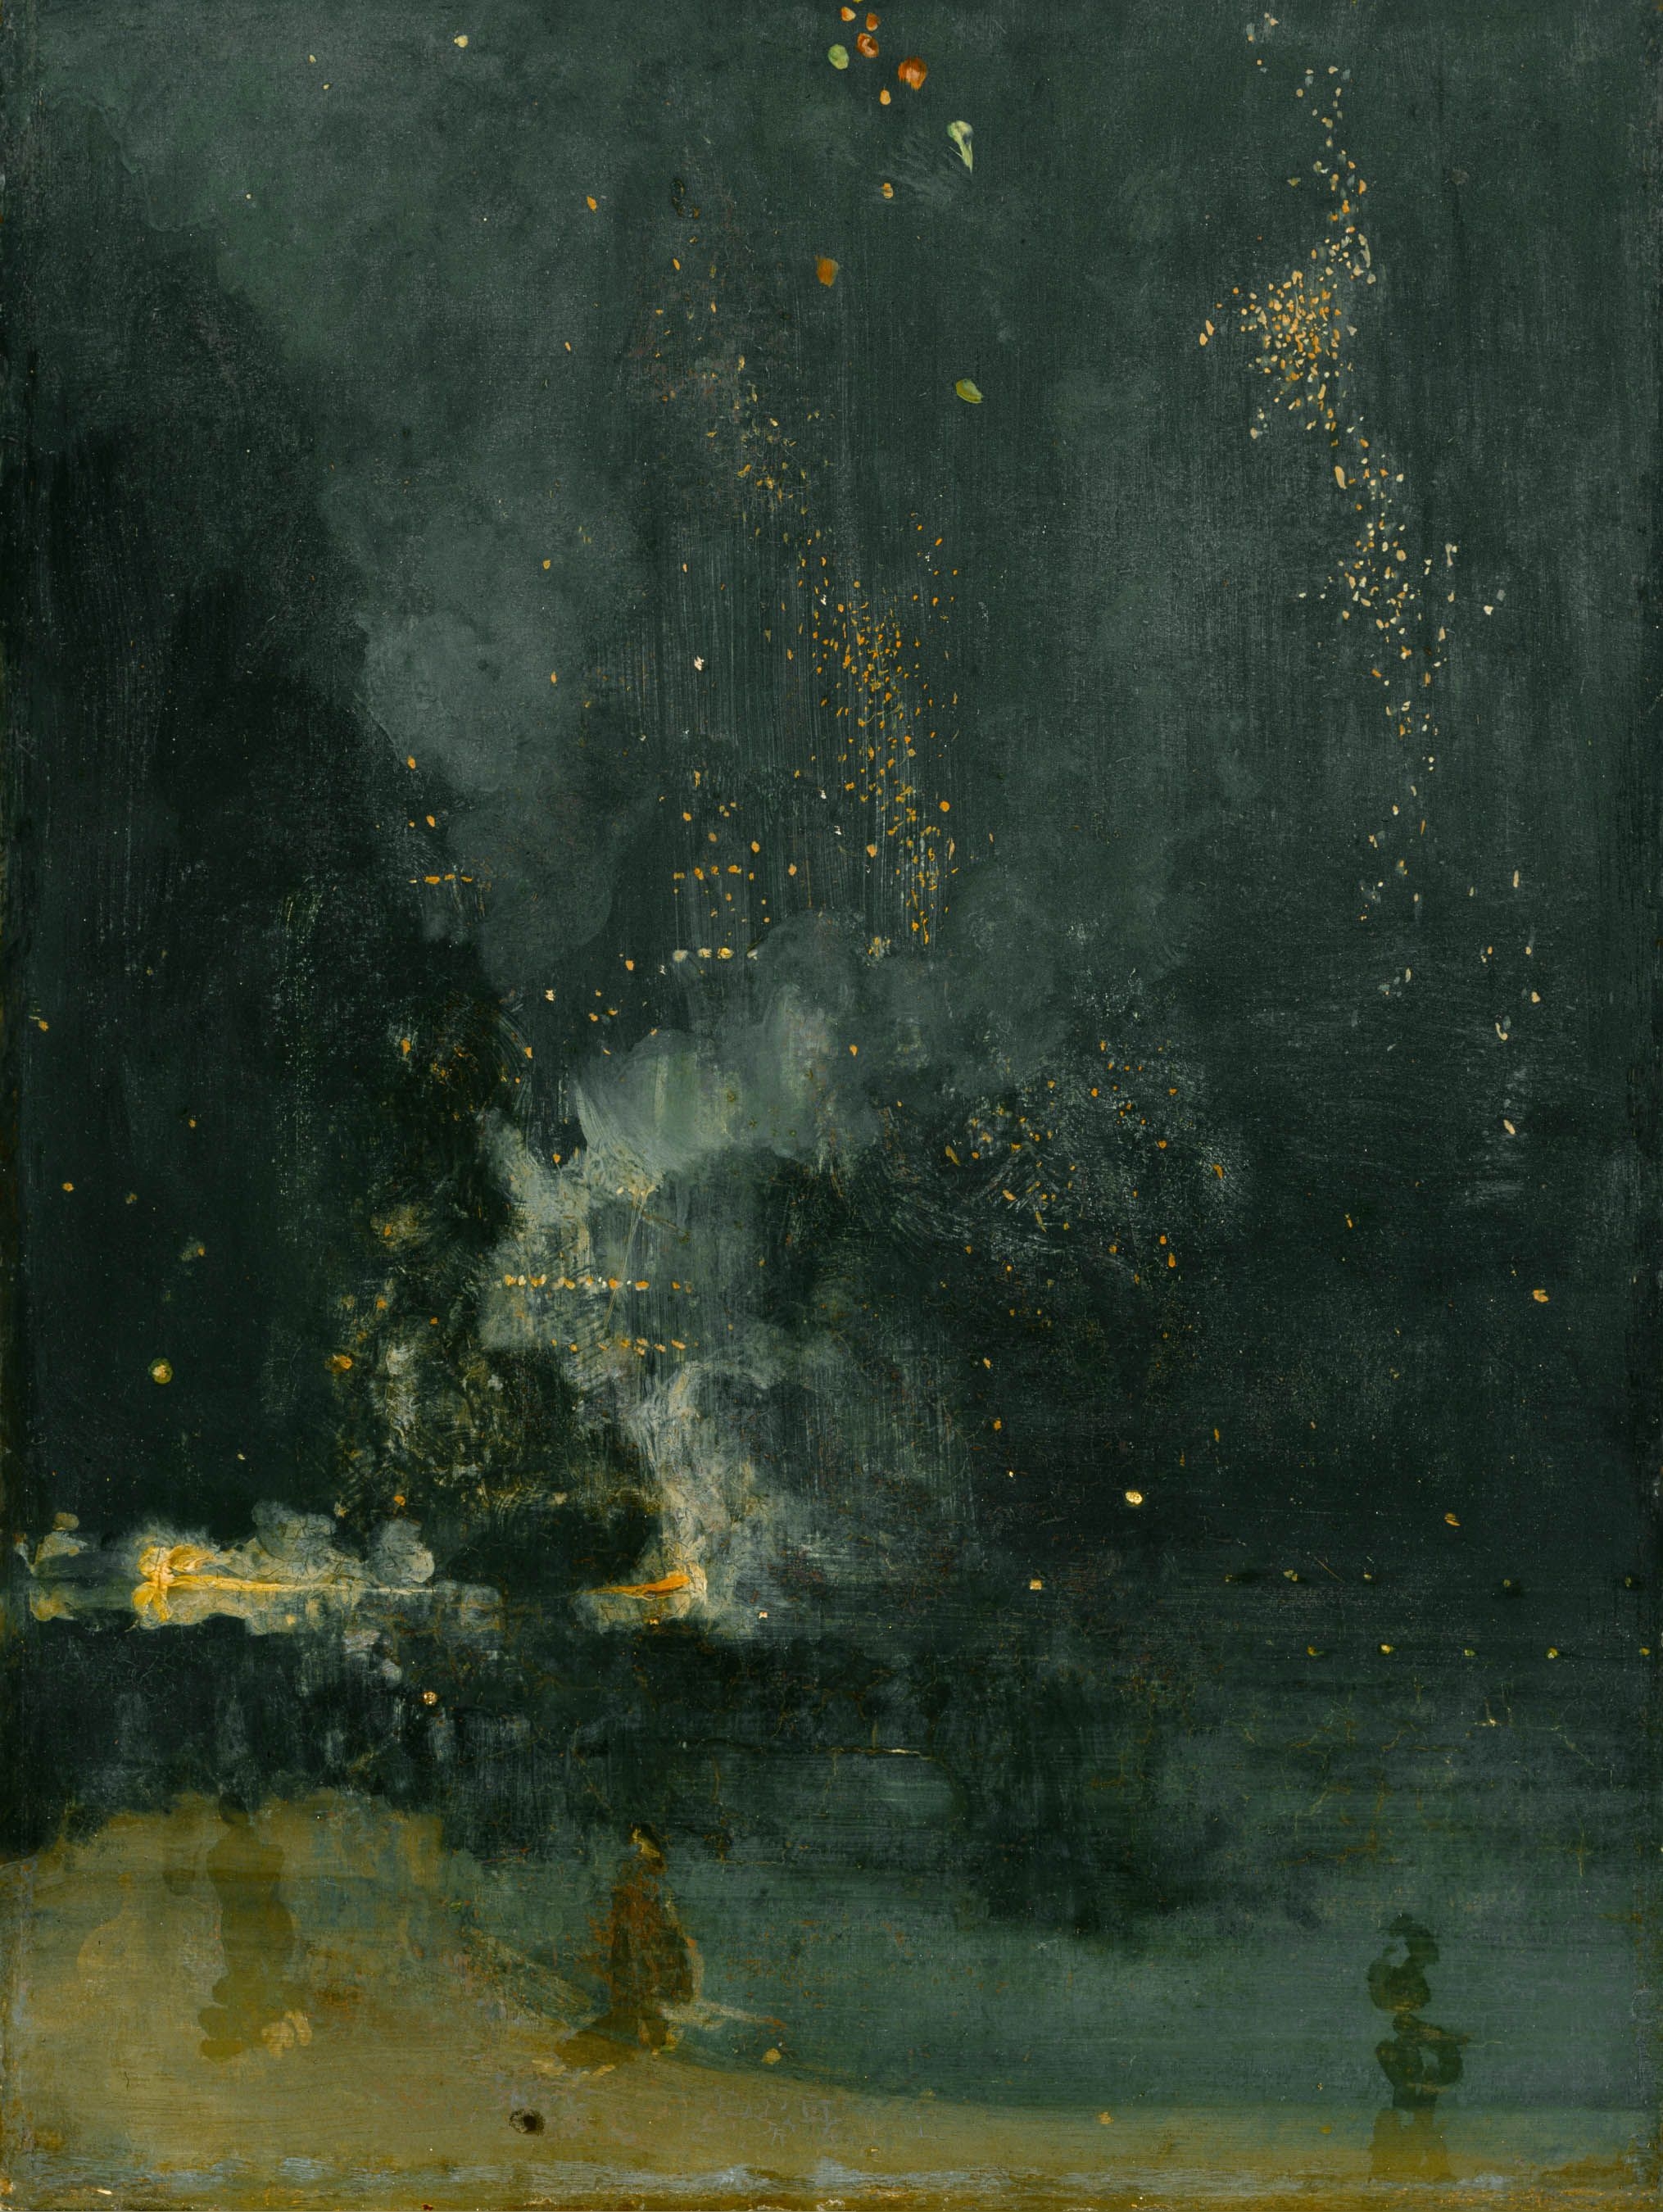 Nocturne in Black and Gold, the Falling Rocket by James Abbott McNeill Whistler - 1875 - 60.3 × 46.7 cm Detroit Institute of Arts